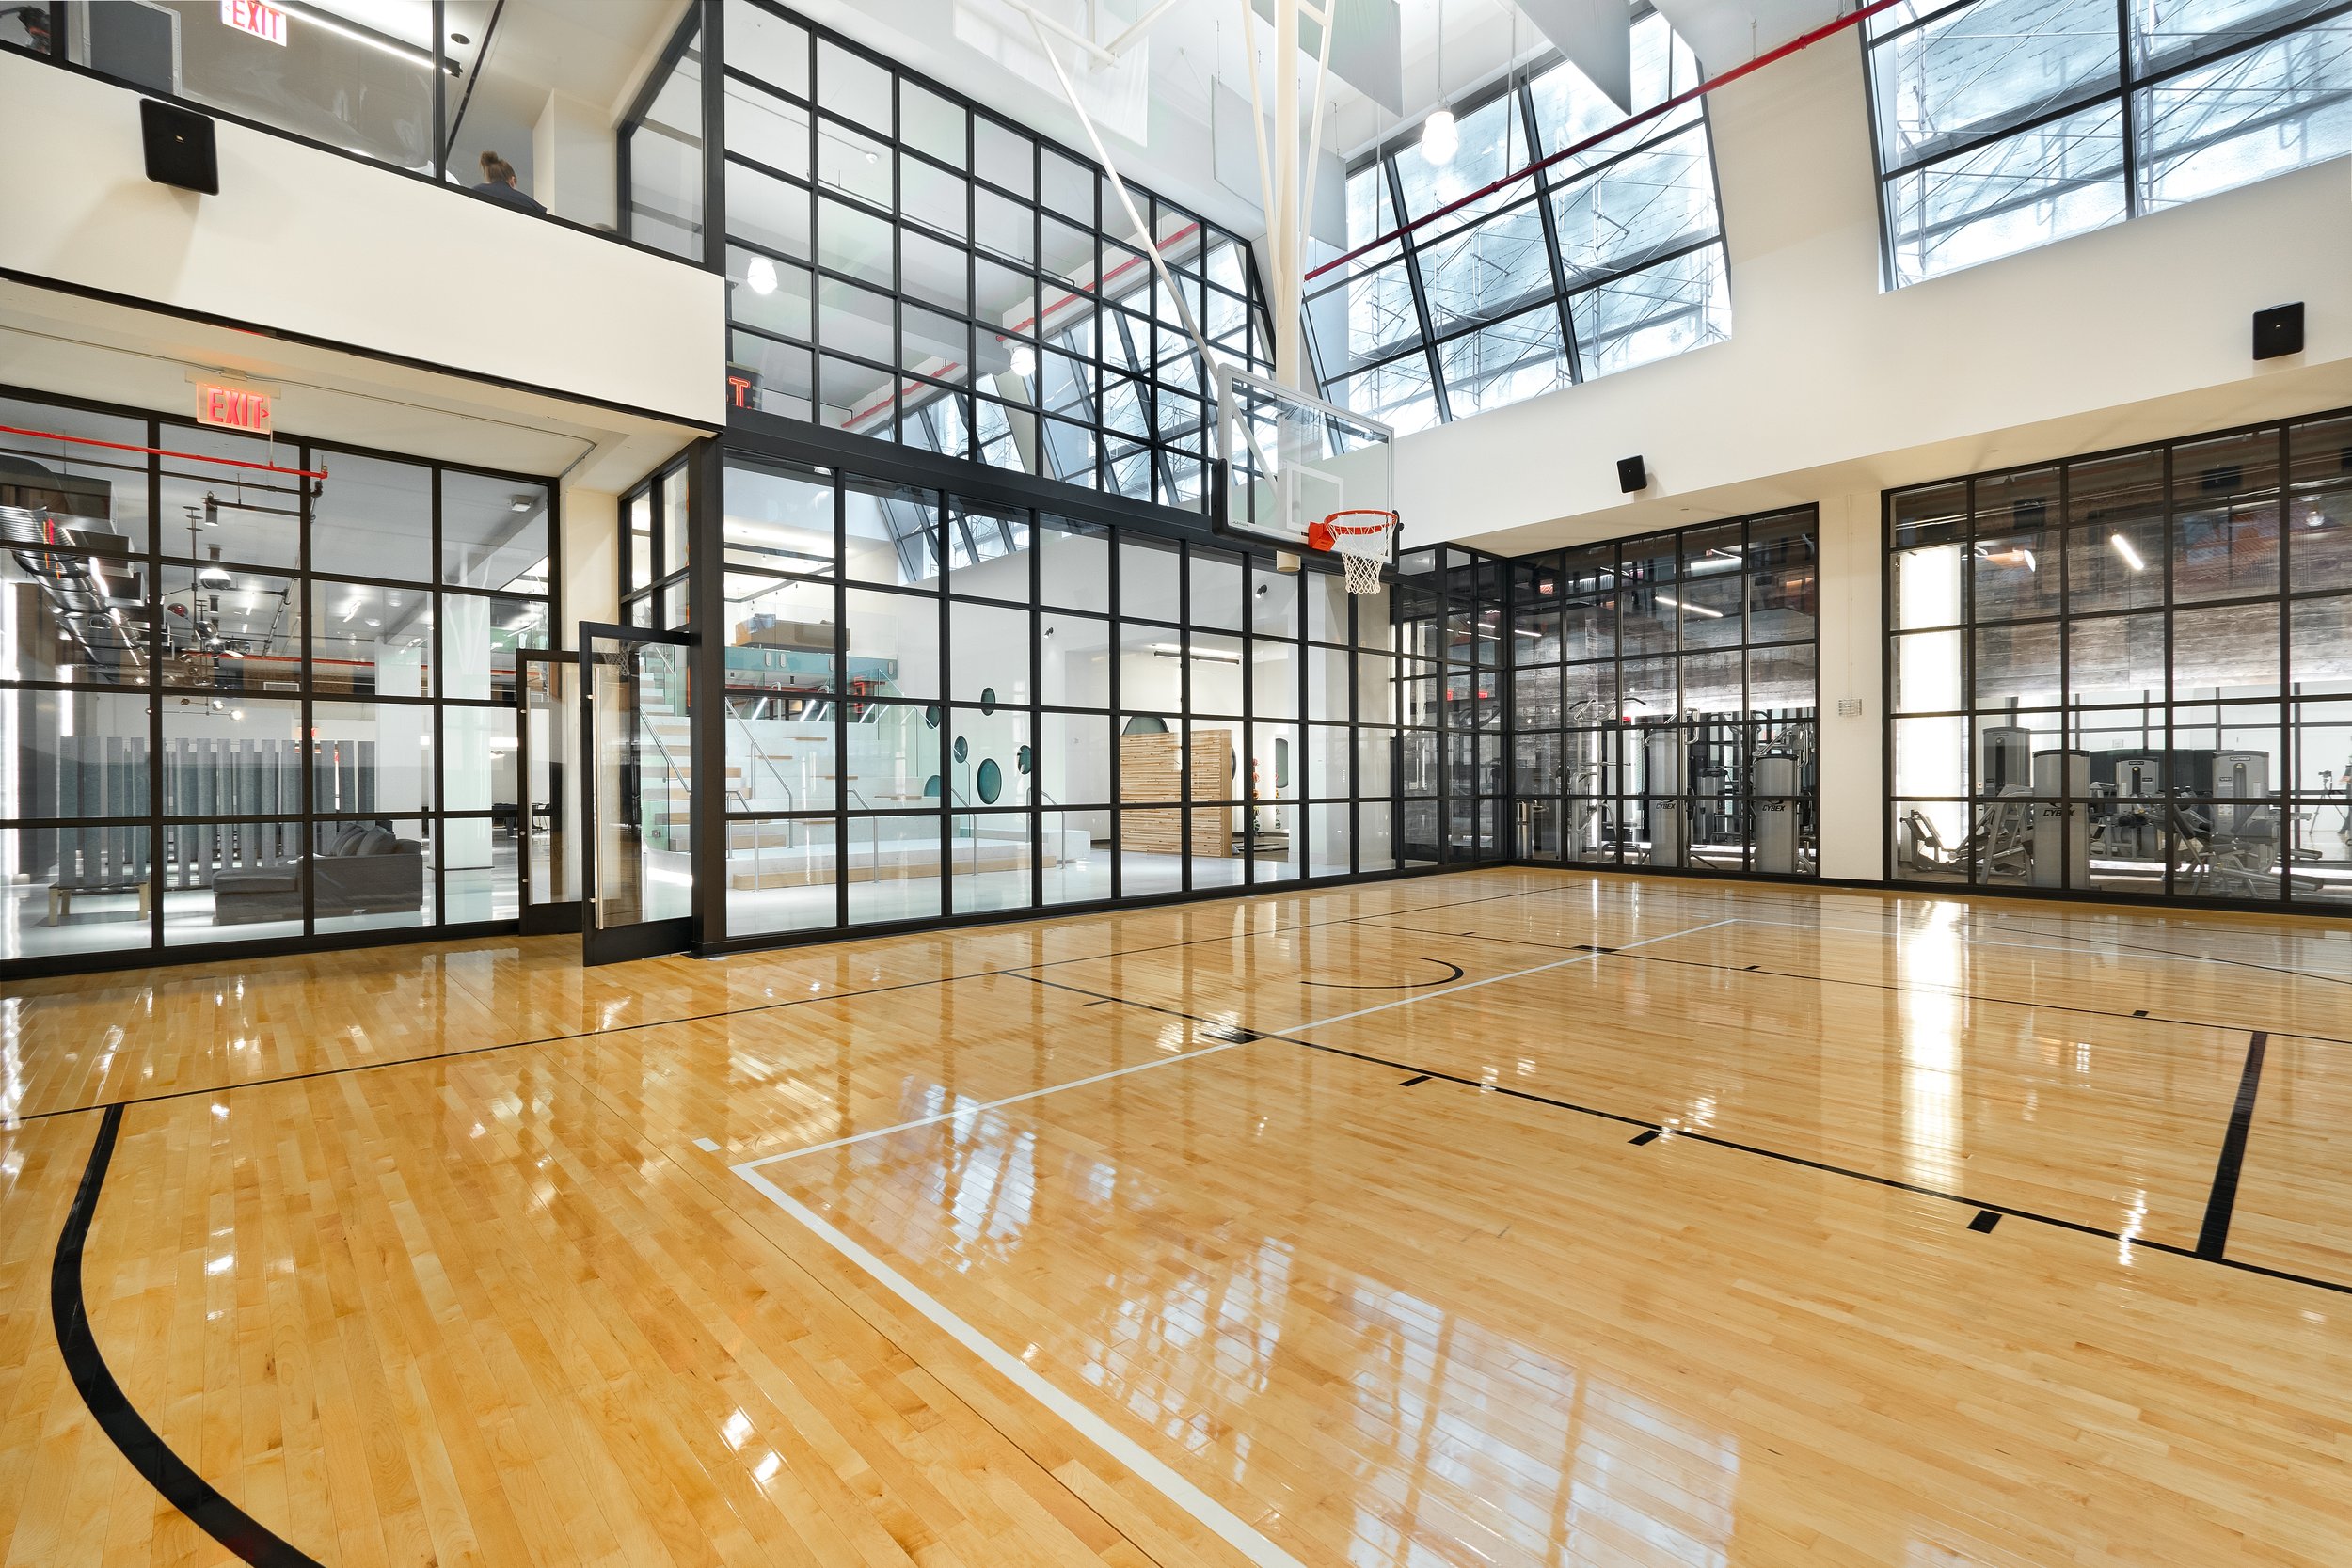 As March Madness Kicks Off, A Look At The Dreamiest Residential Basketball  Courts In NYC